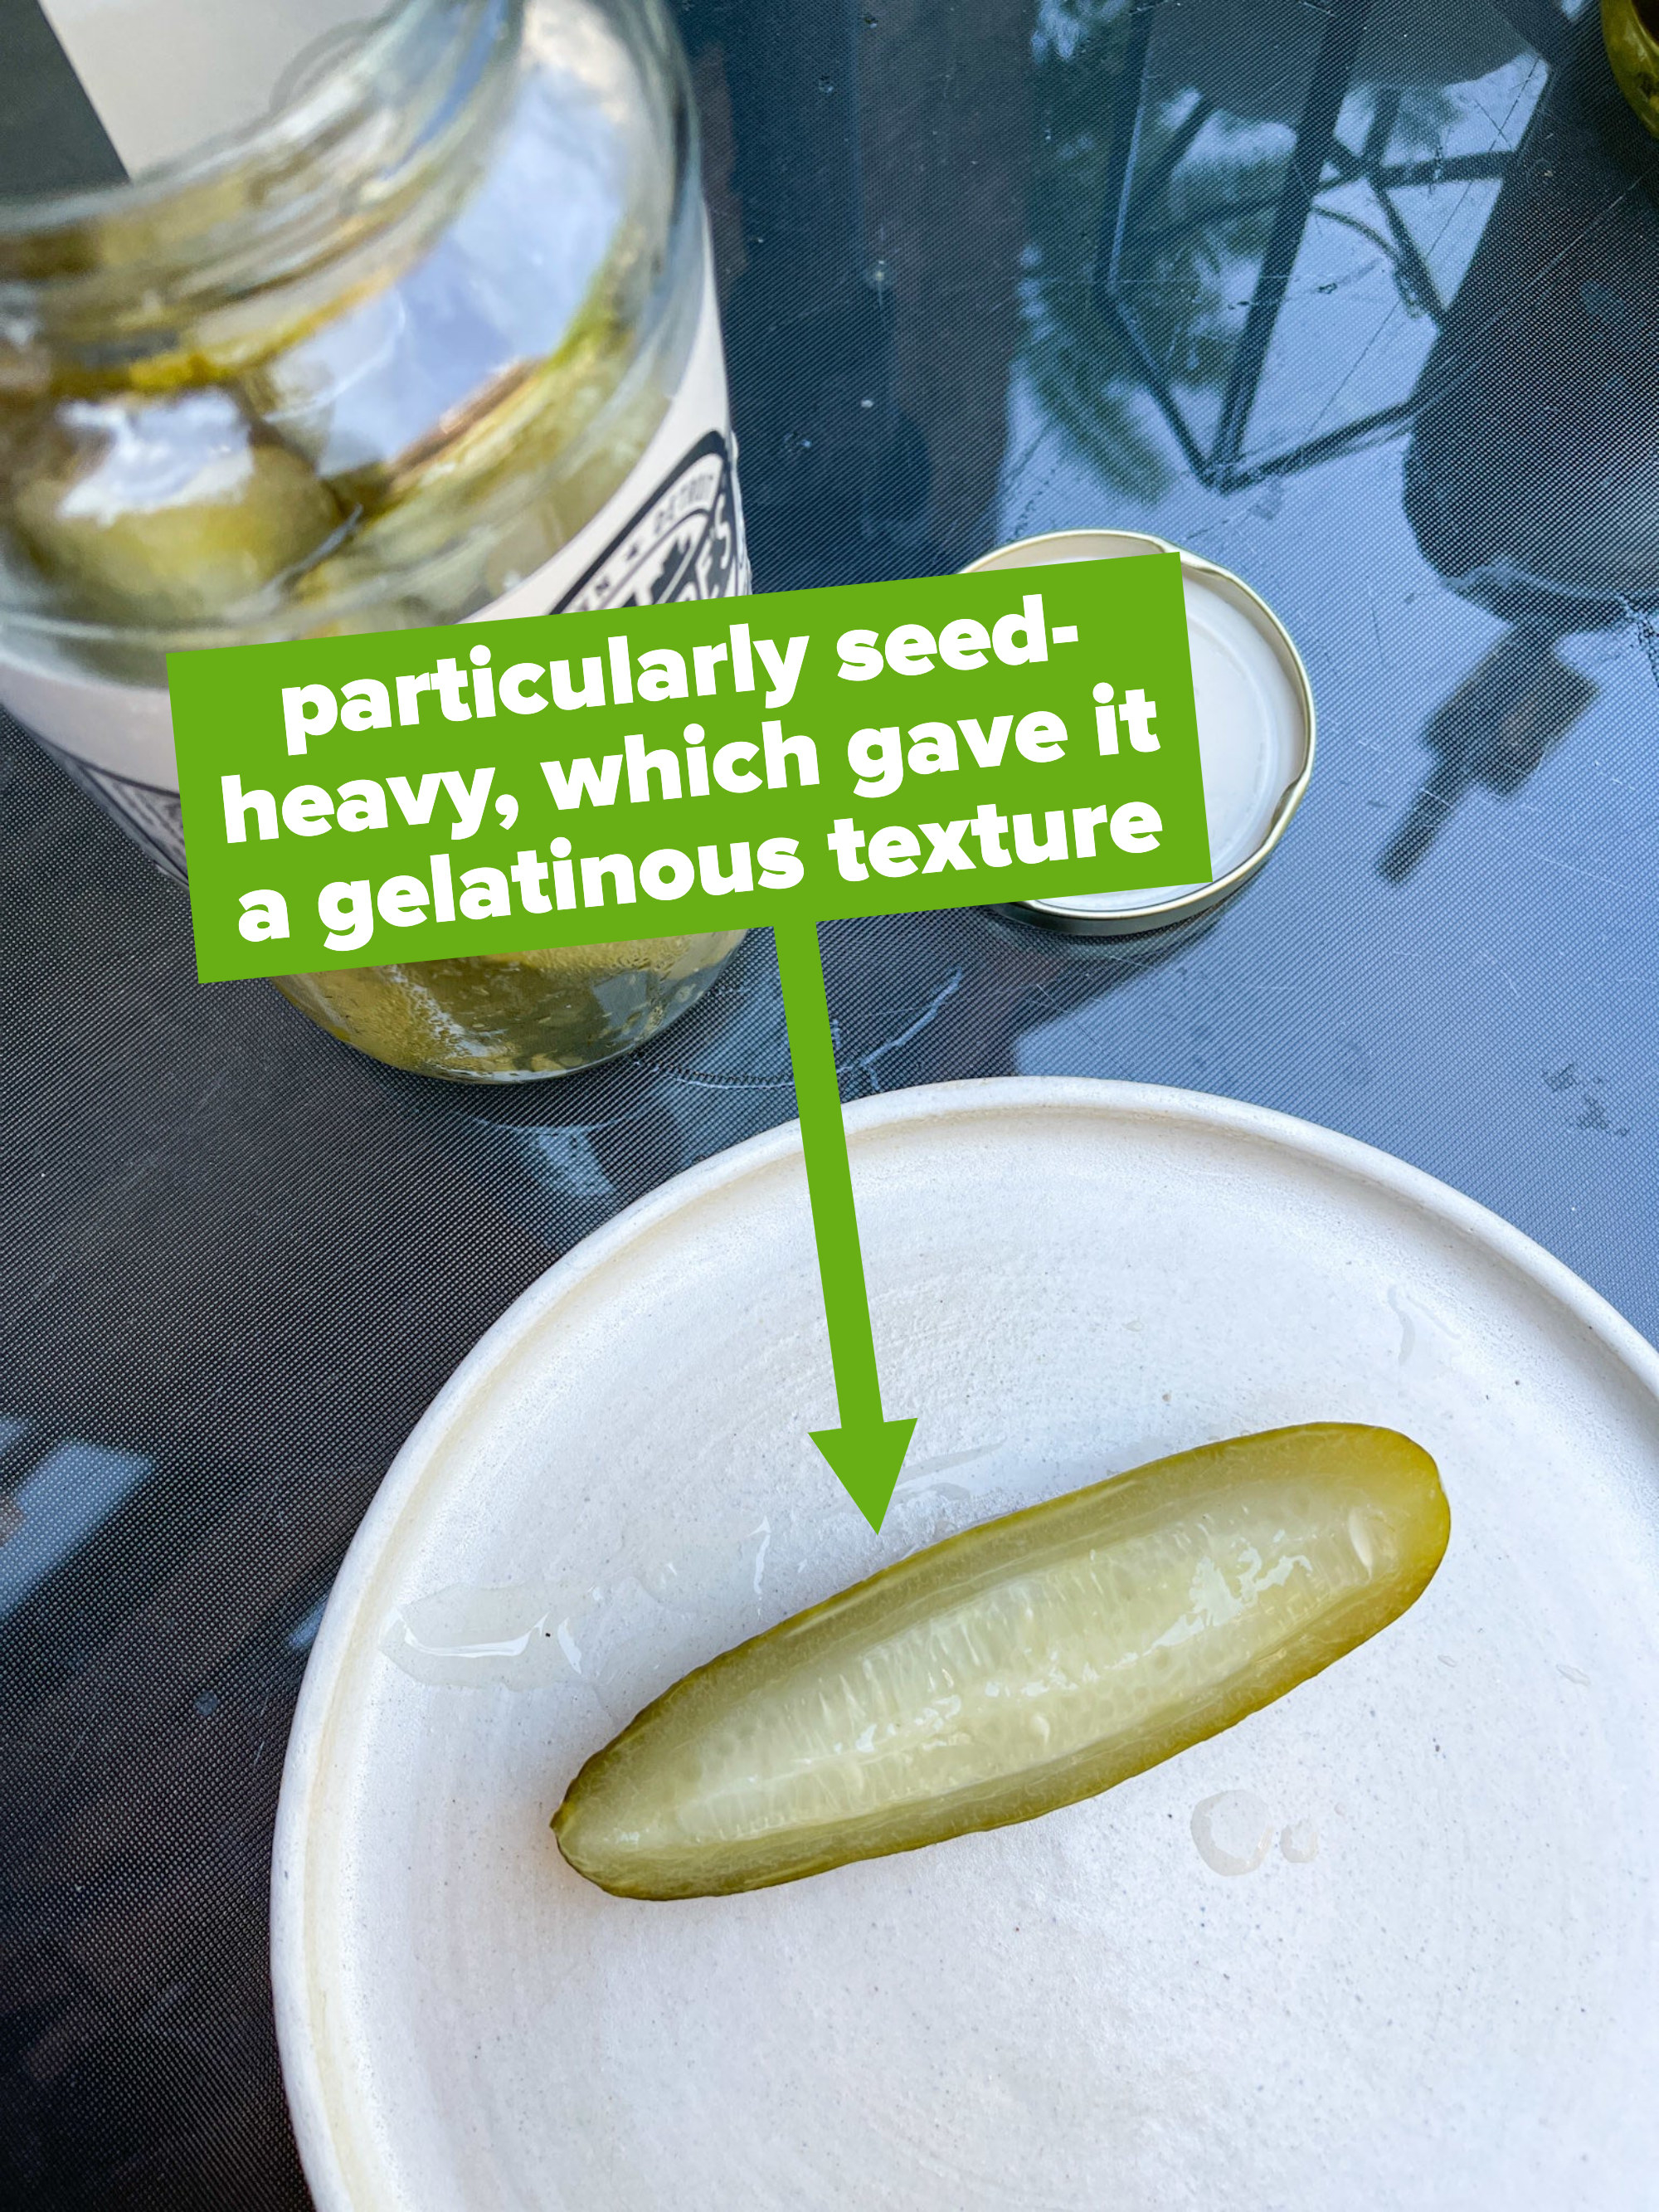 Beyond the off-putting flavor, I found the texture of these pickles to be o...